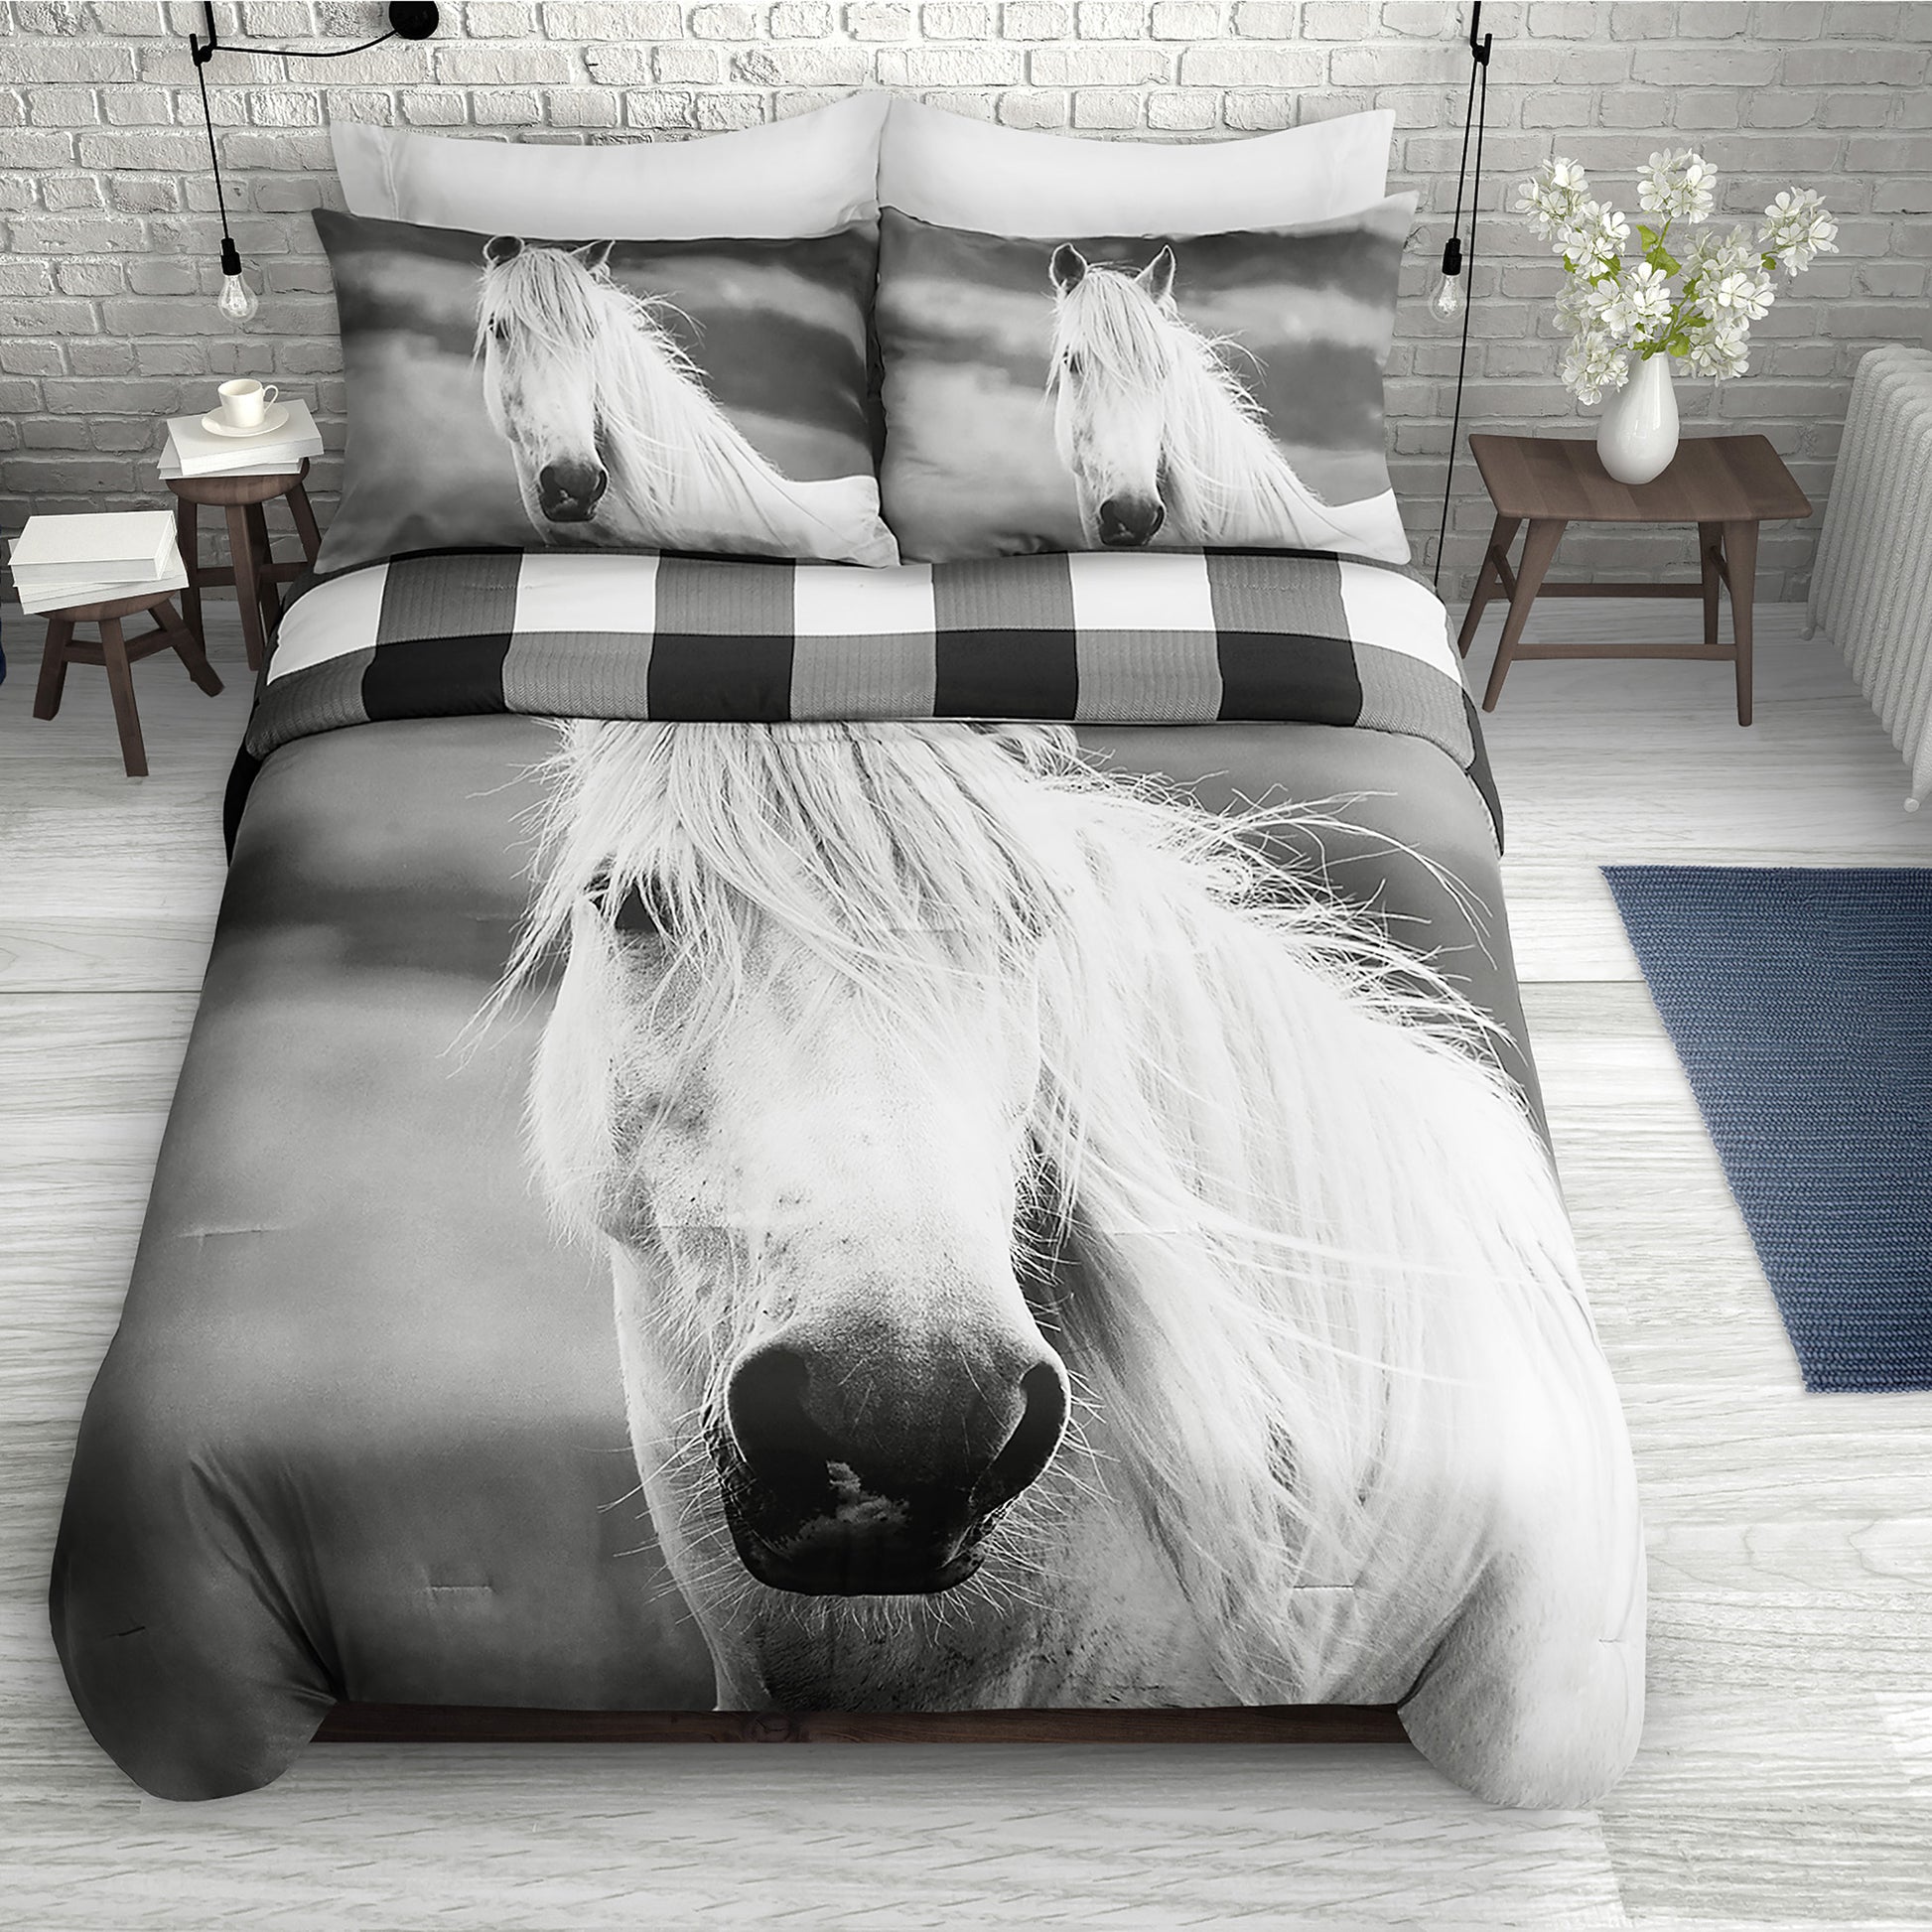 Woven Printed Comforter Bedding Set 3 Piece King Winter Horse Rustic Cabin